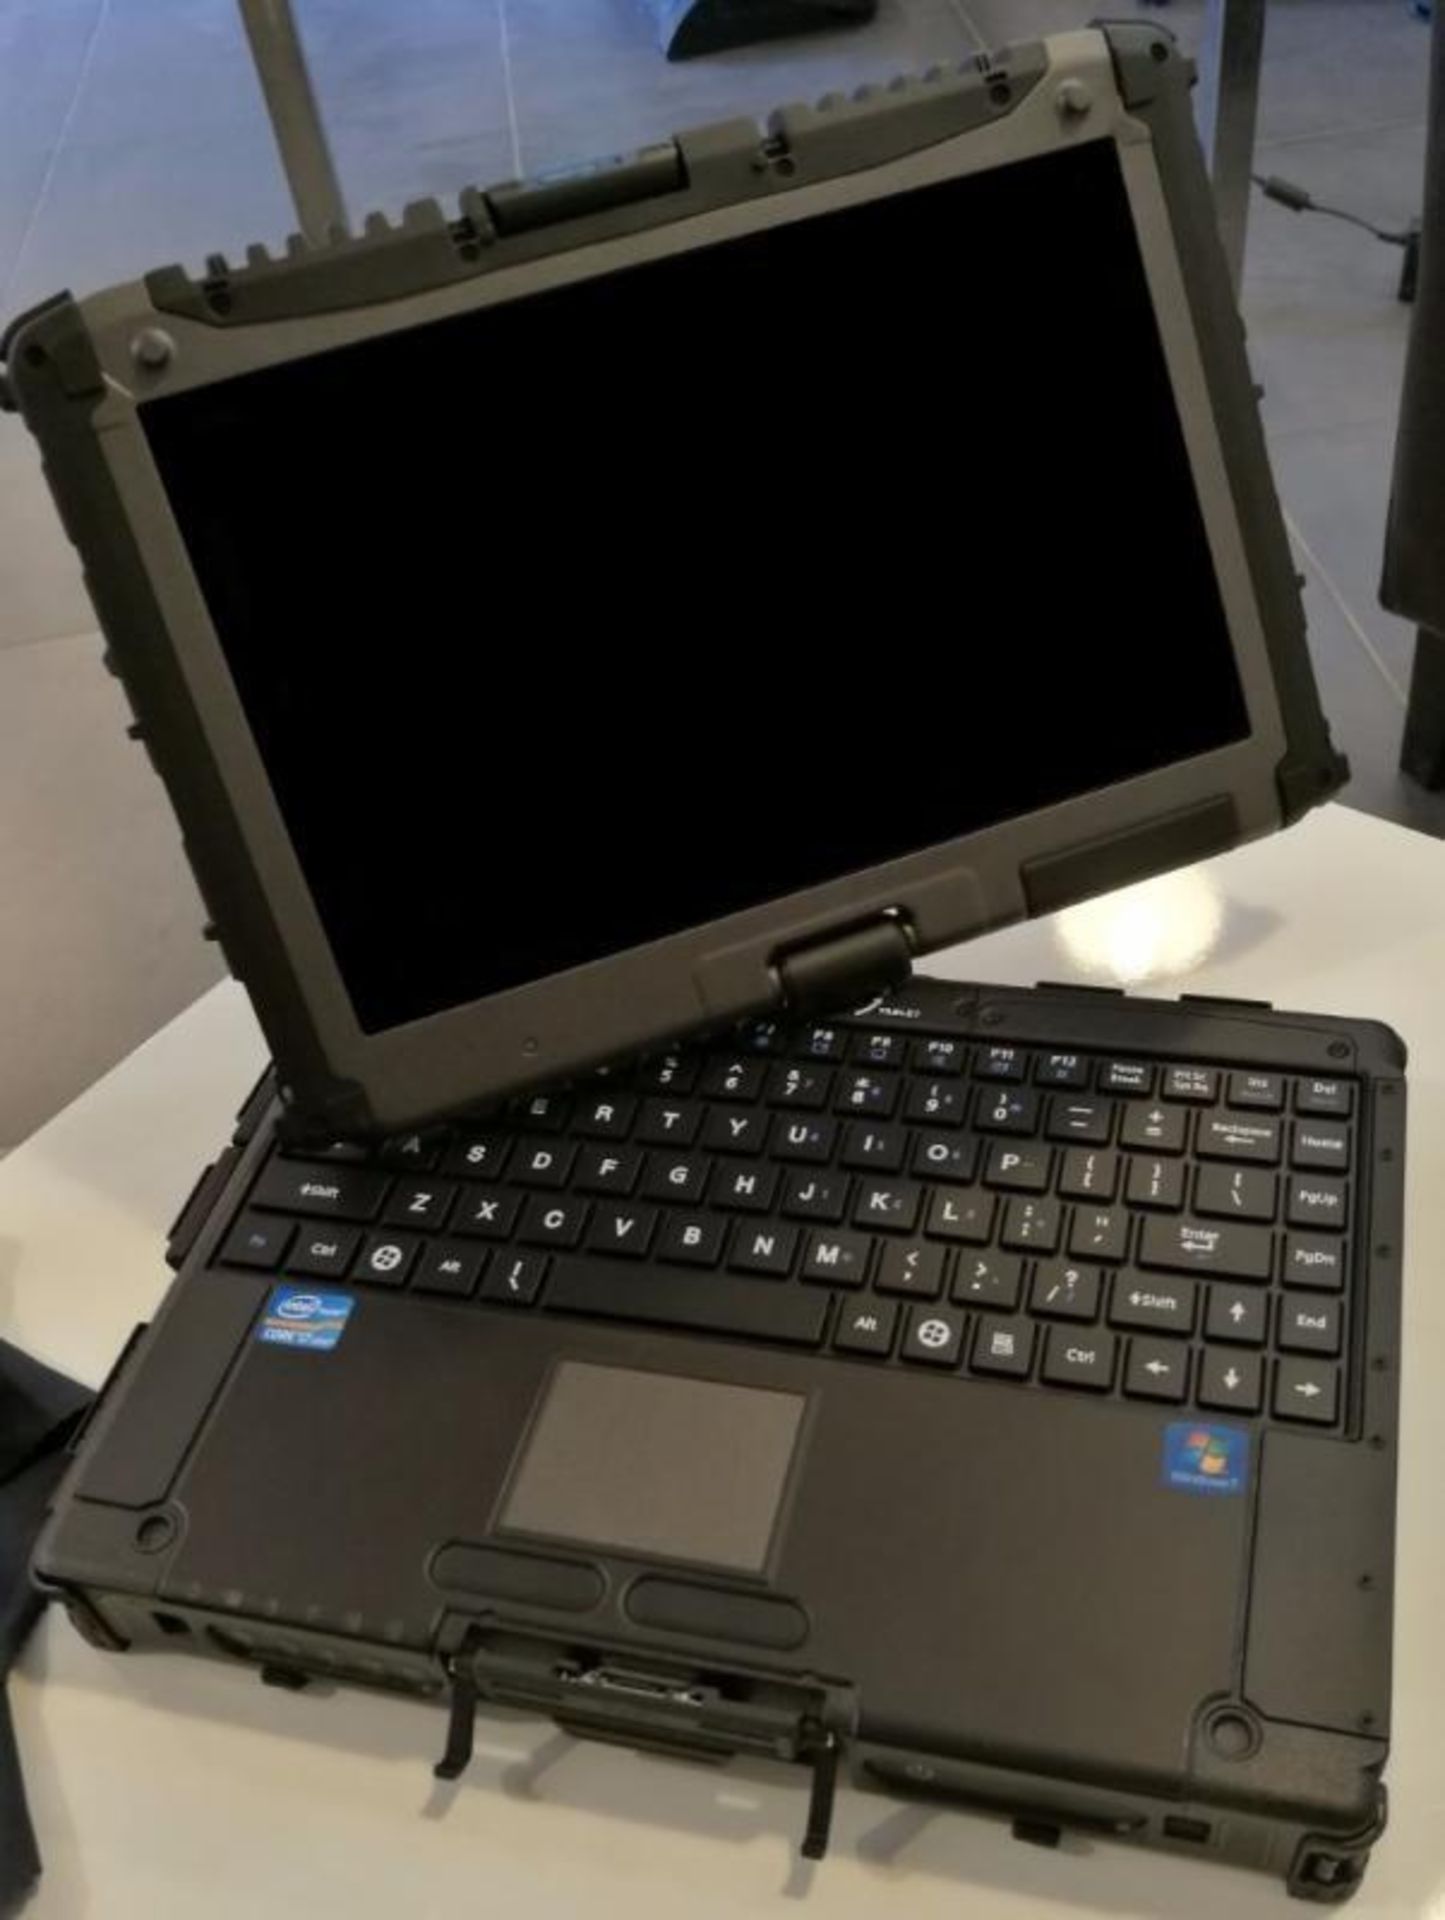 1 x Getac V200 Rugged Laptop Computer - Rugged Laptop That Transforms into a Tablet PC - Features an - Image 6 of 8